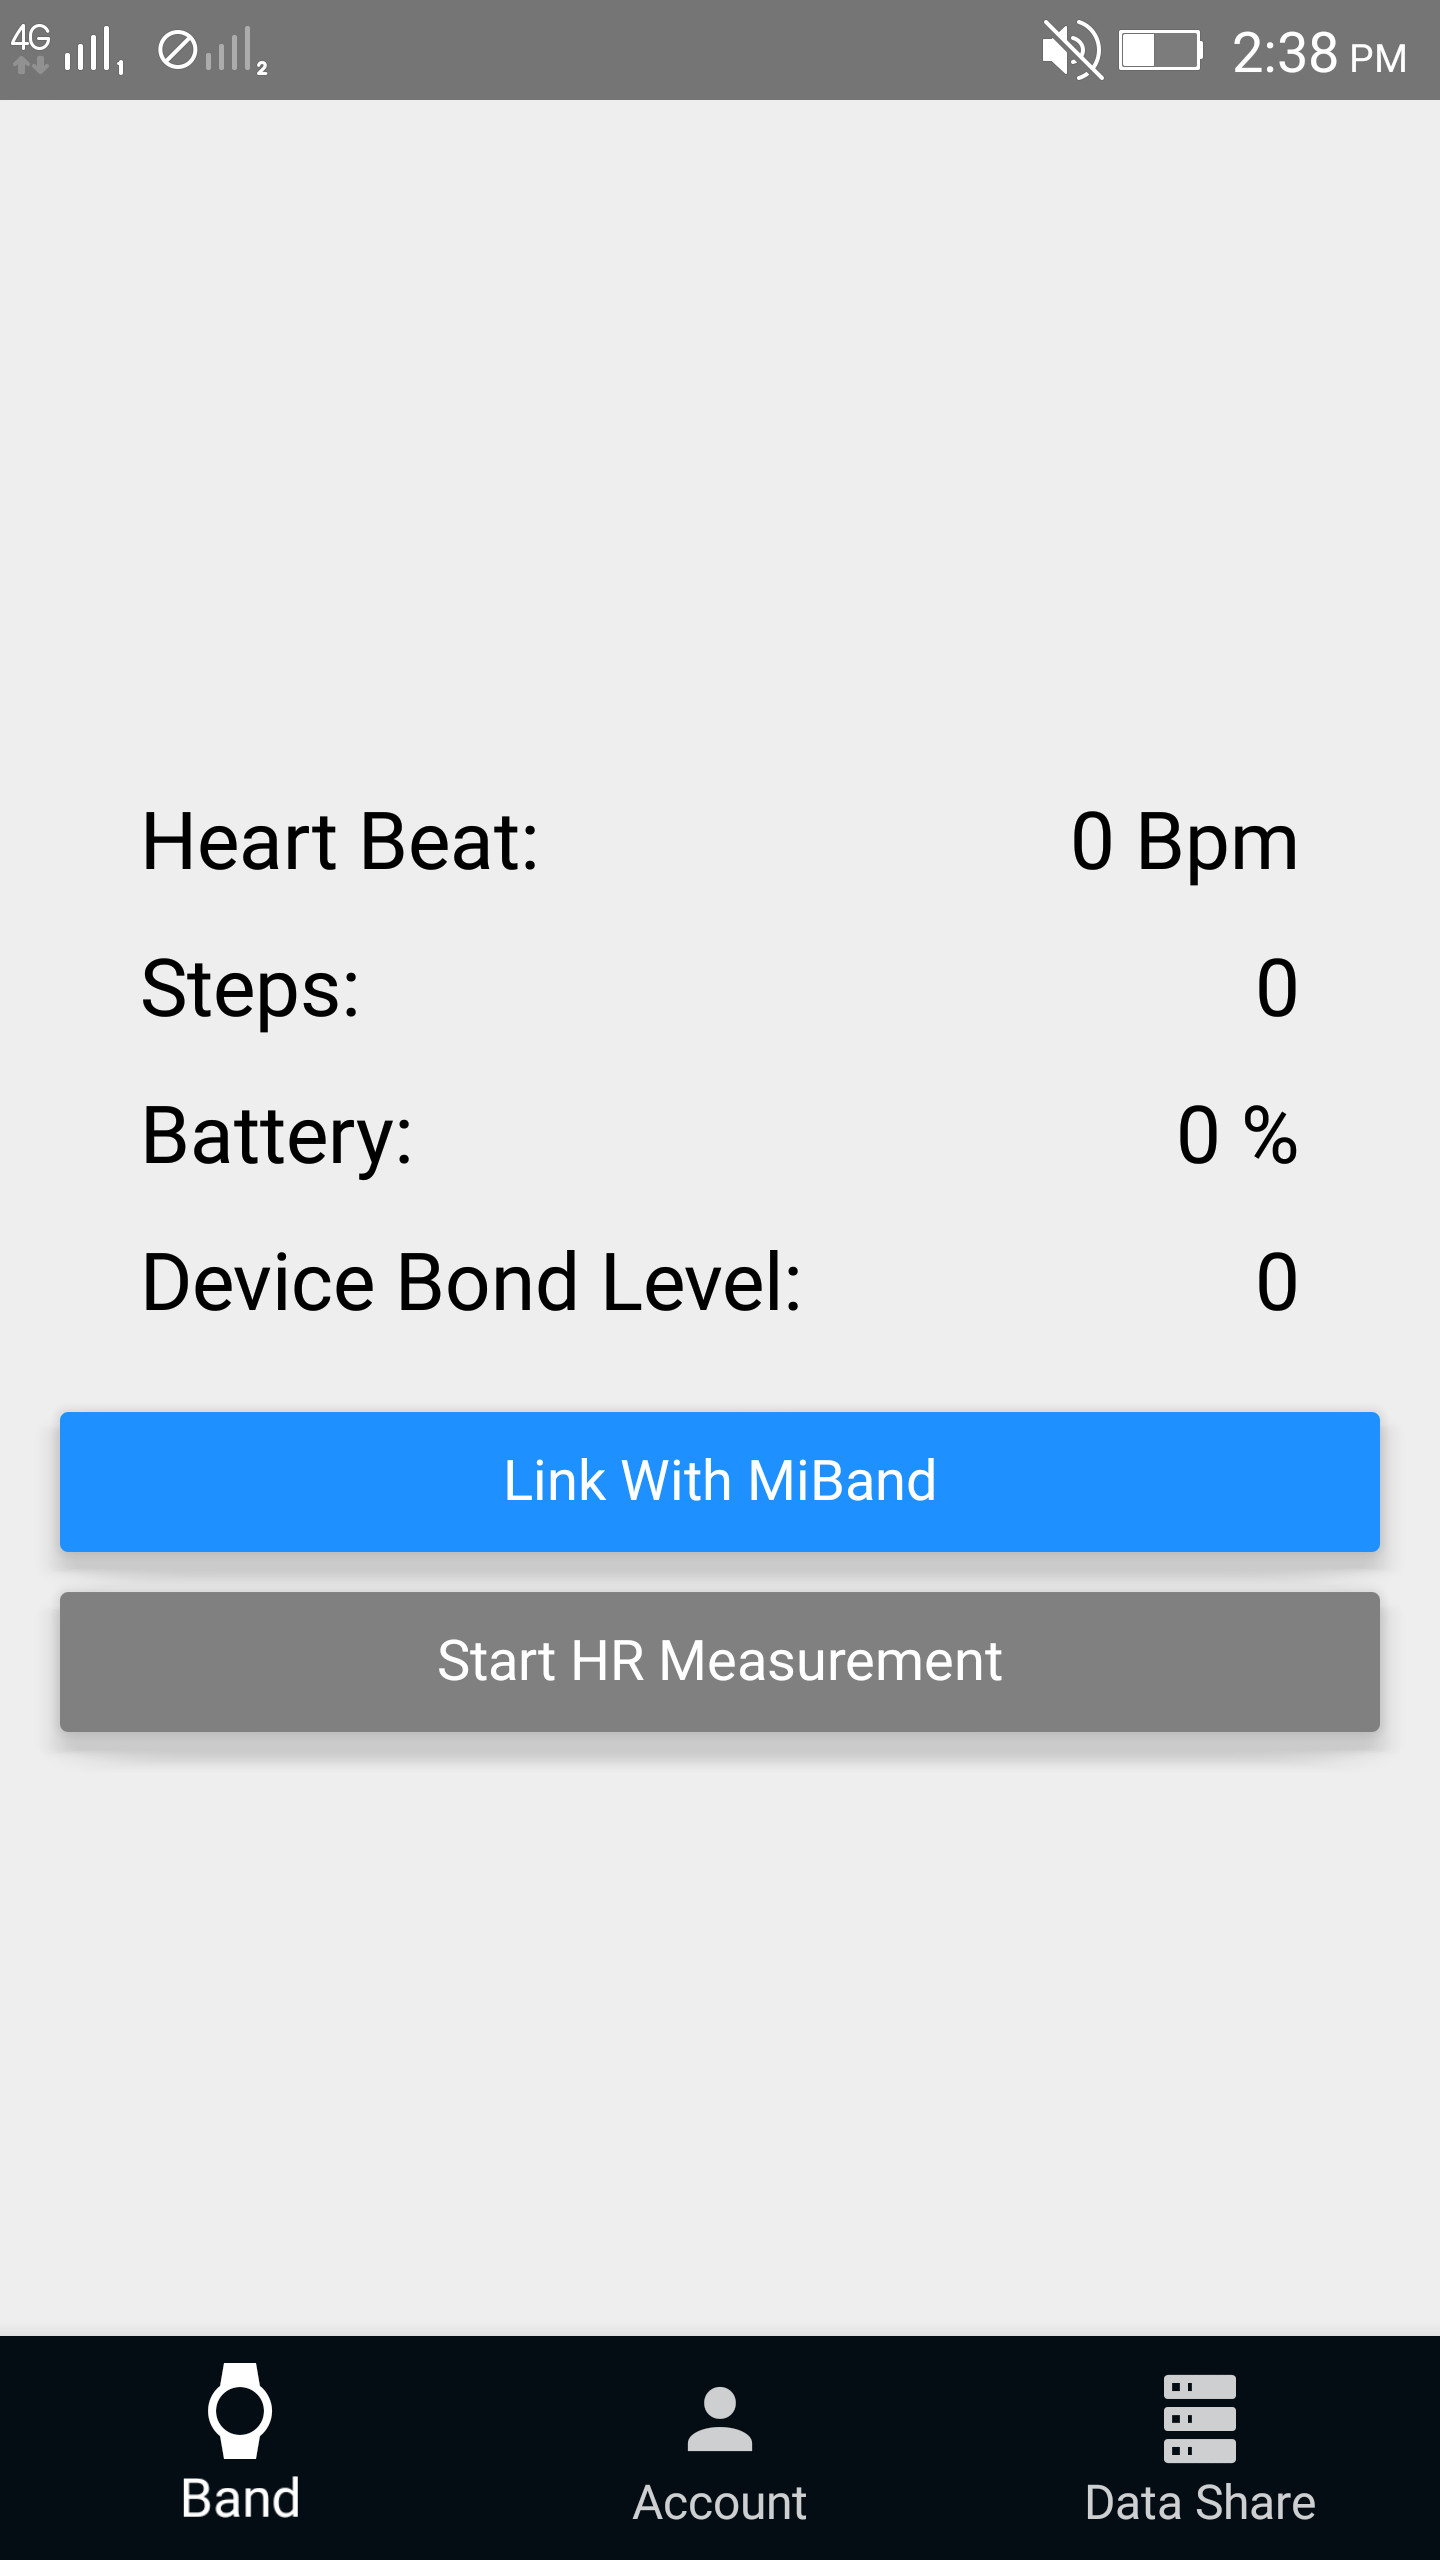 Link with MiBand